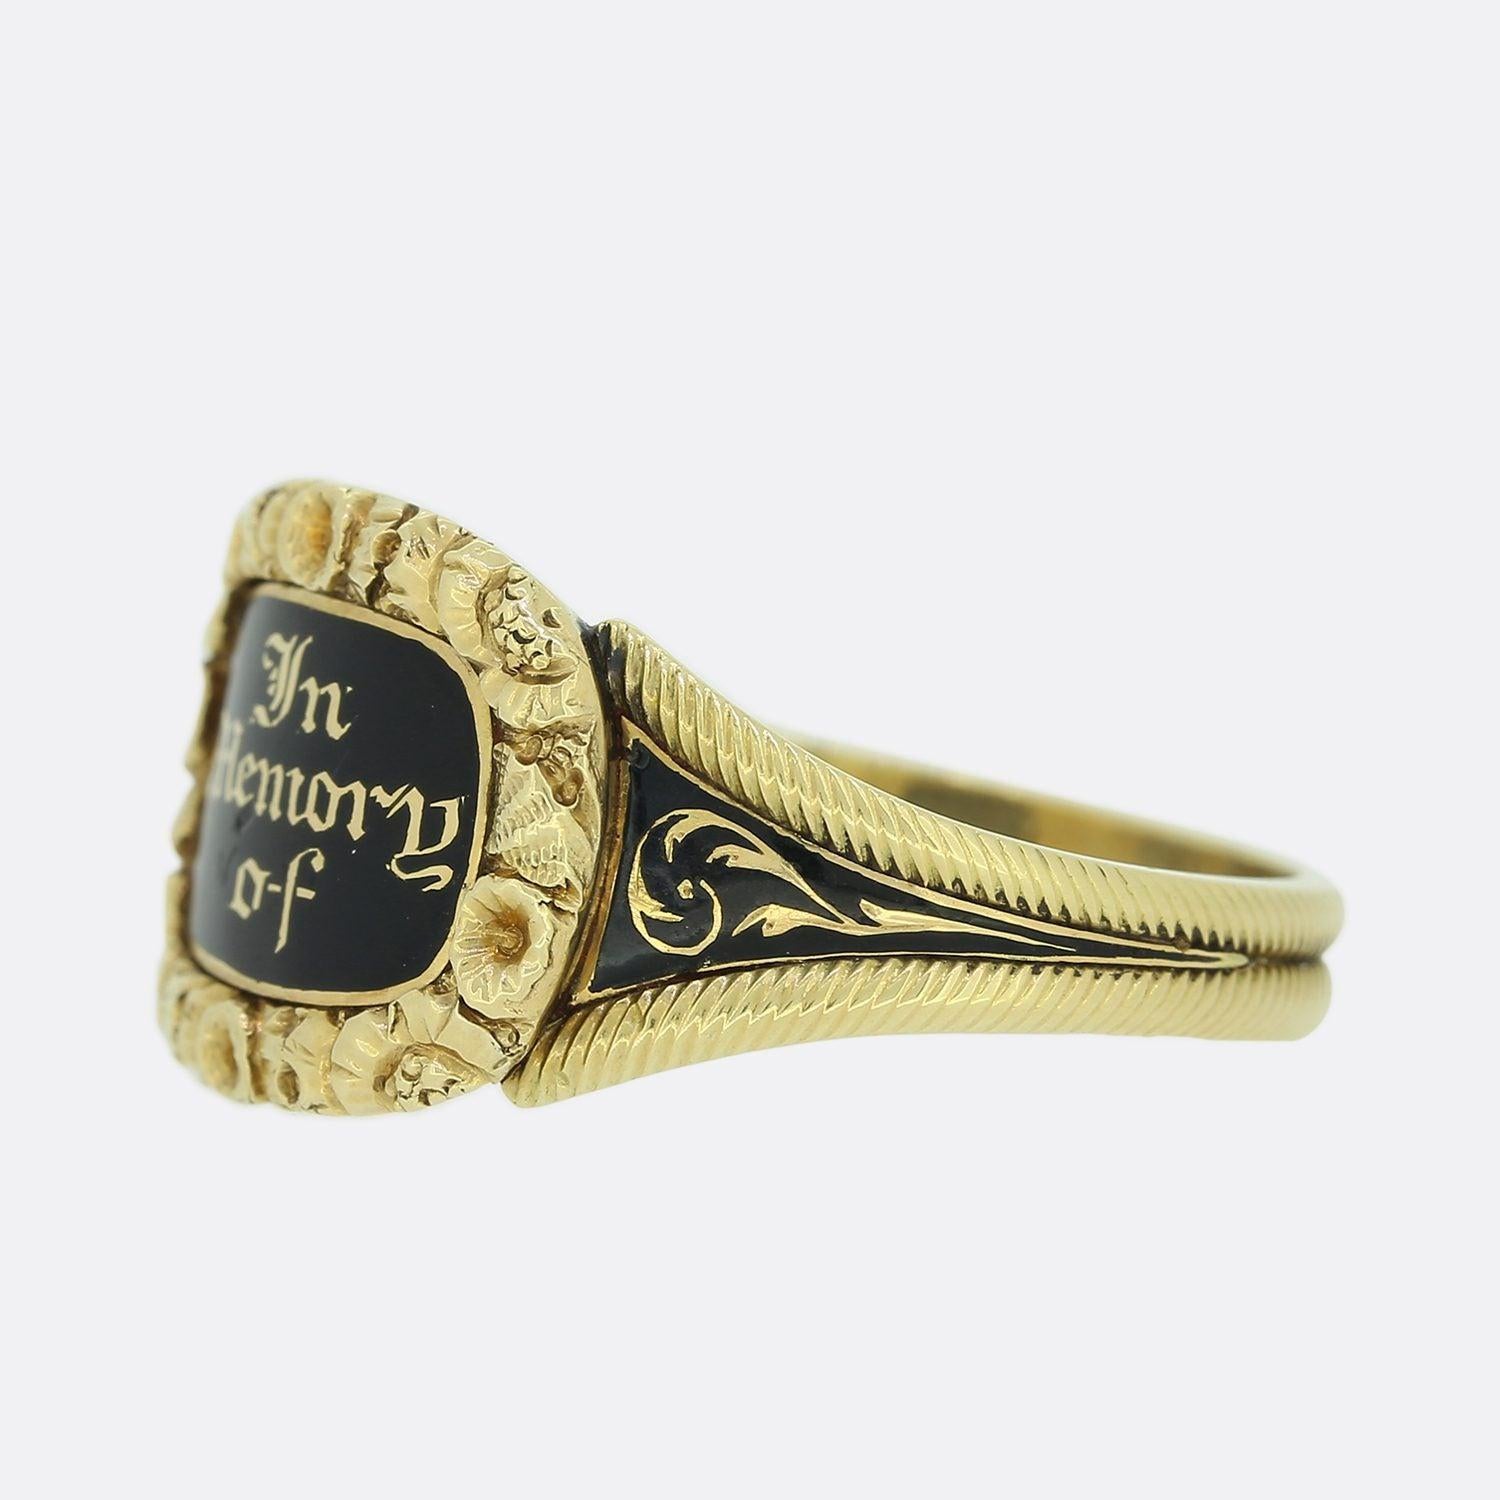 This is an exquisite mourning ring from the mid Victorian era. The head of the ring has the words 'In Memory Of' in black enamel with a carved floral border. The ring has been very well preserved and the enamel is in excellent condition. The